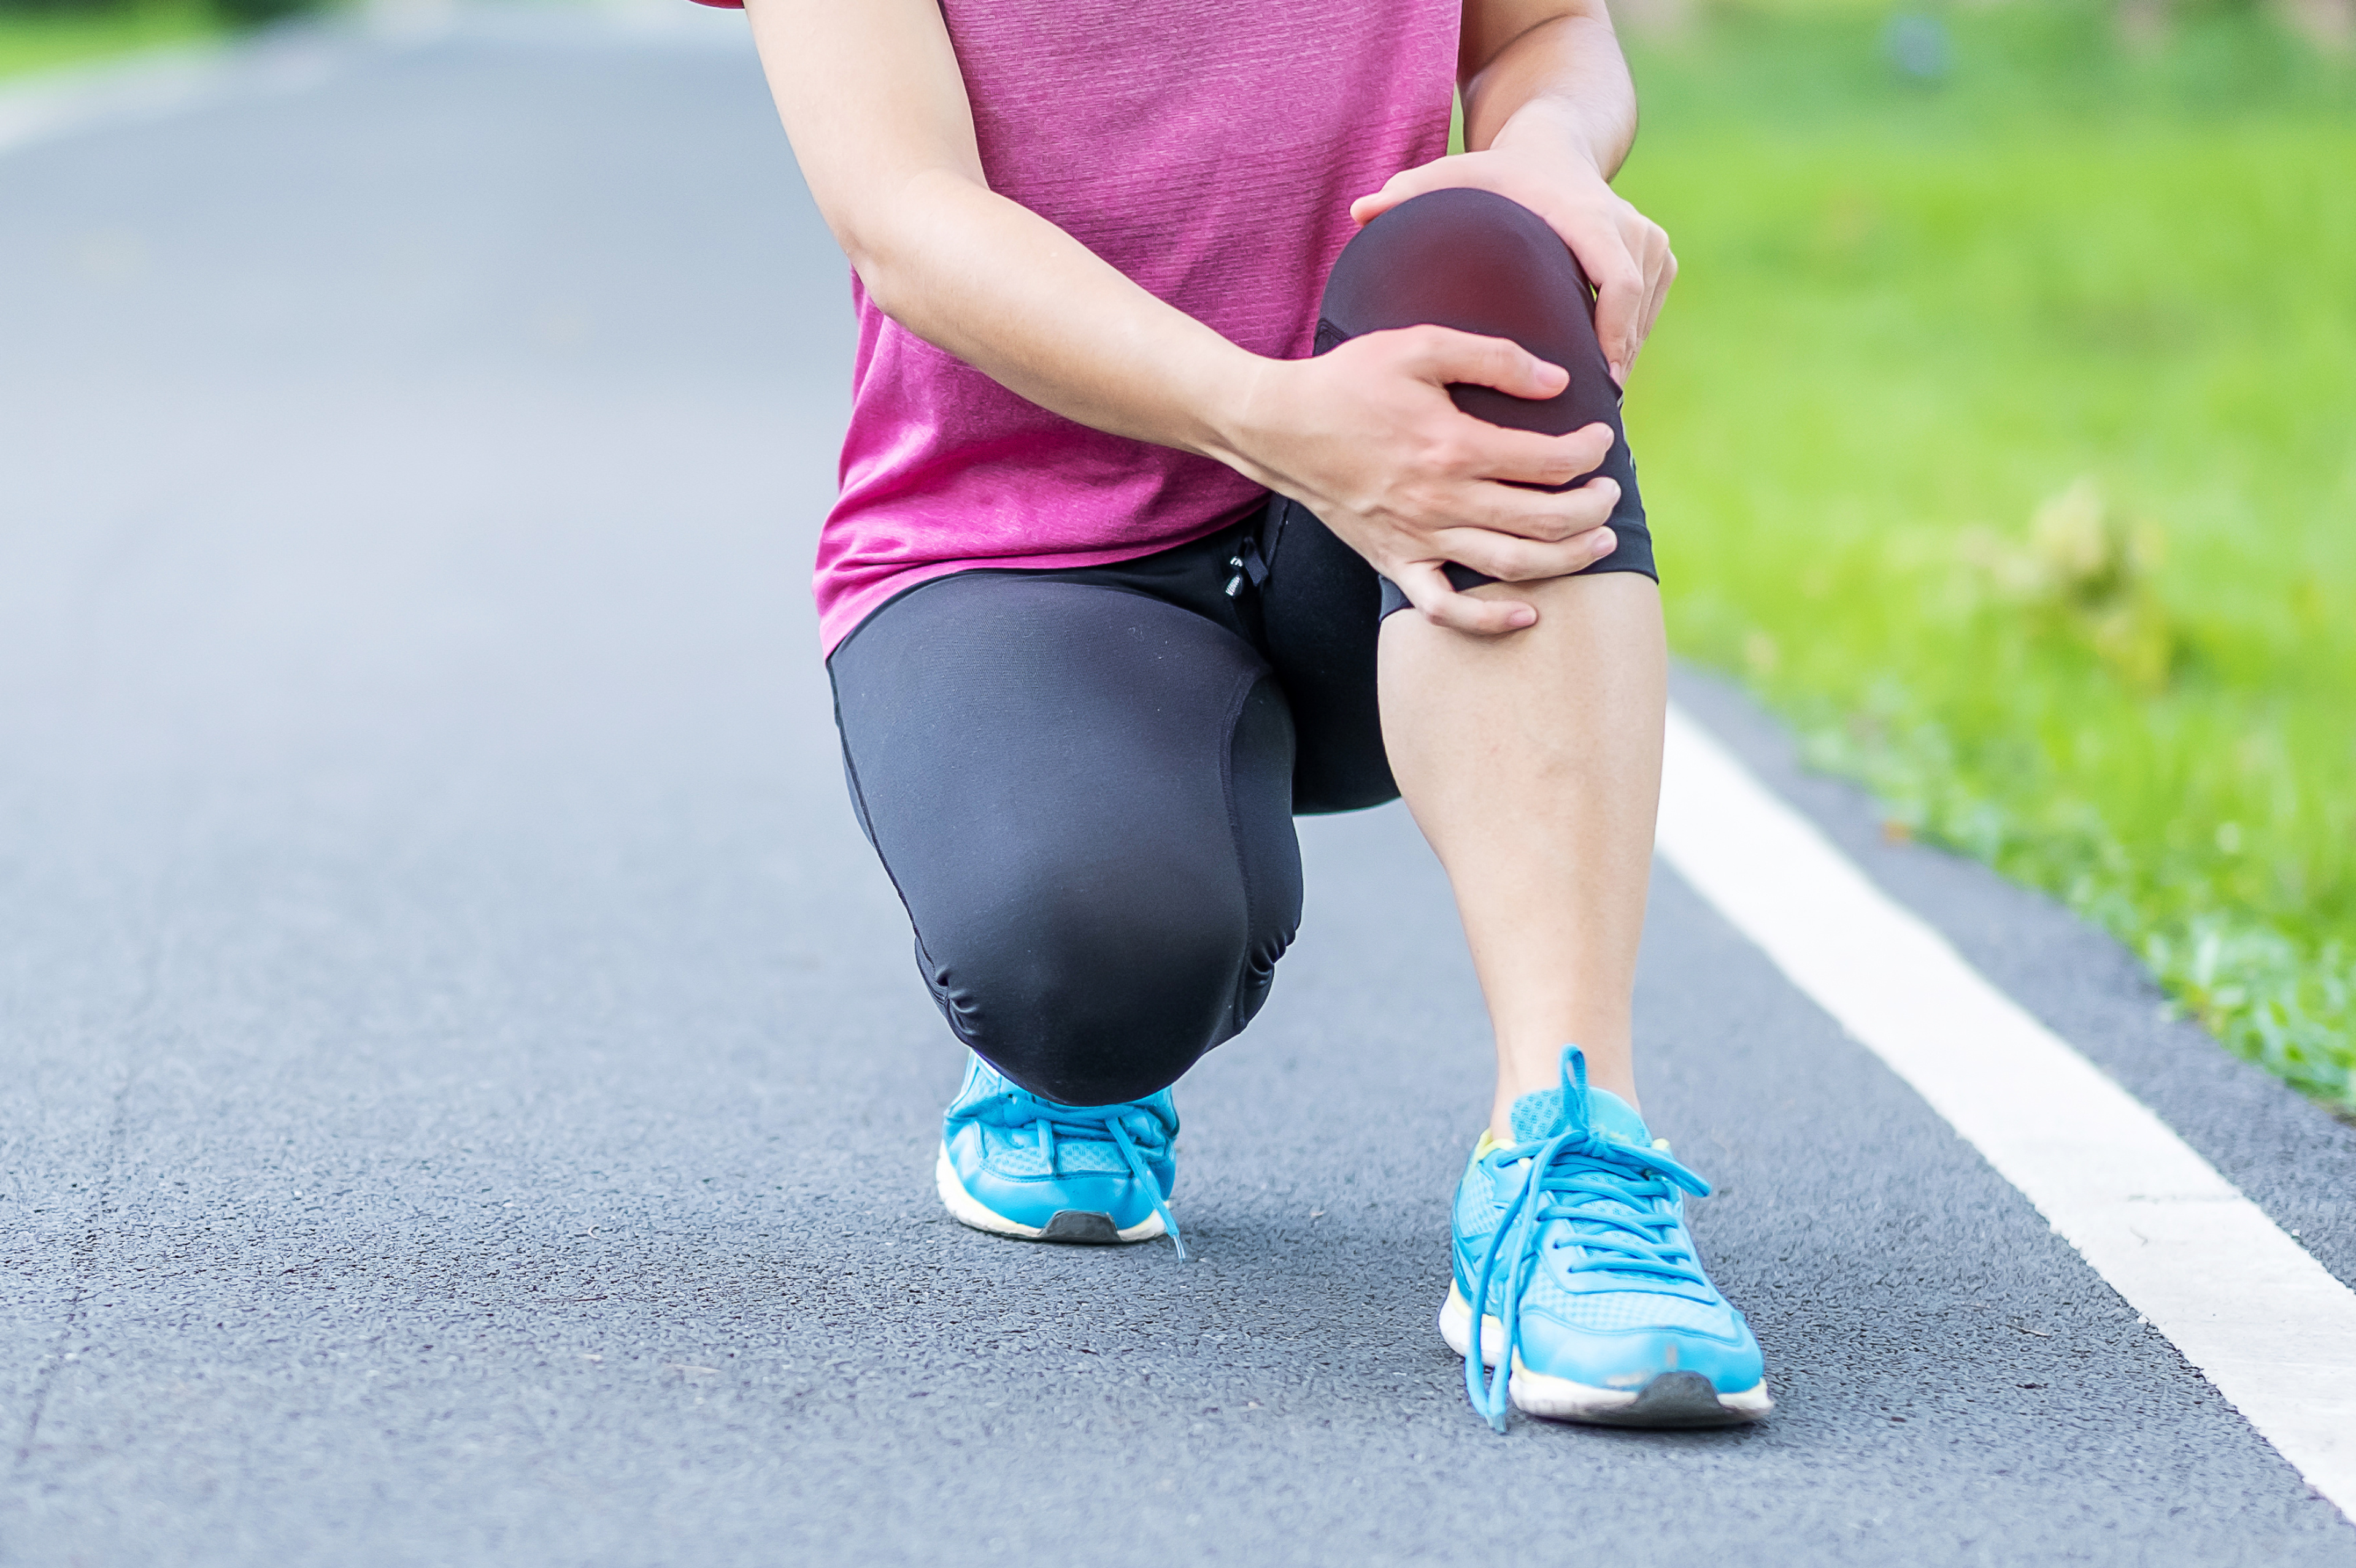 Learn what causes patellar tendonitis in runners, what the typical symptoms are, what treatments work best and how long patellar tendonitis recovery takes.